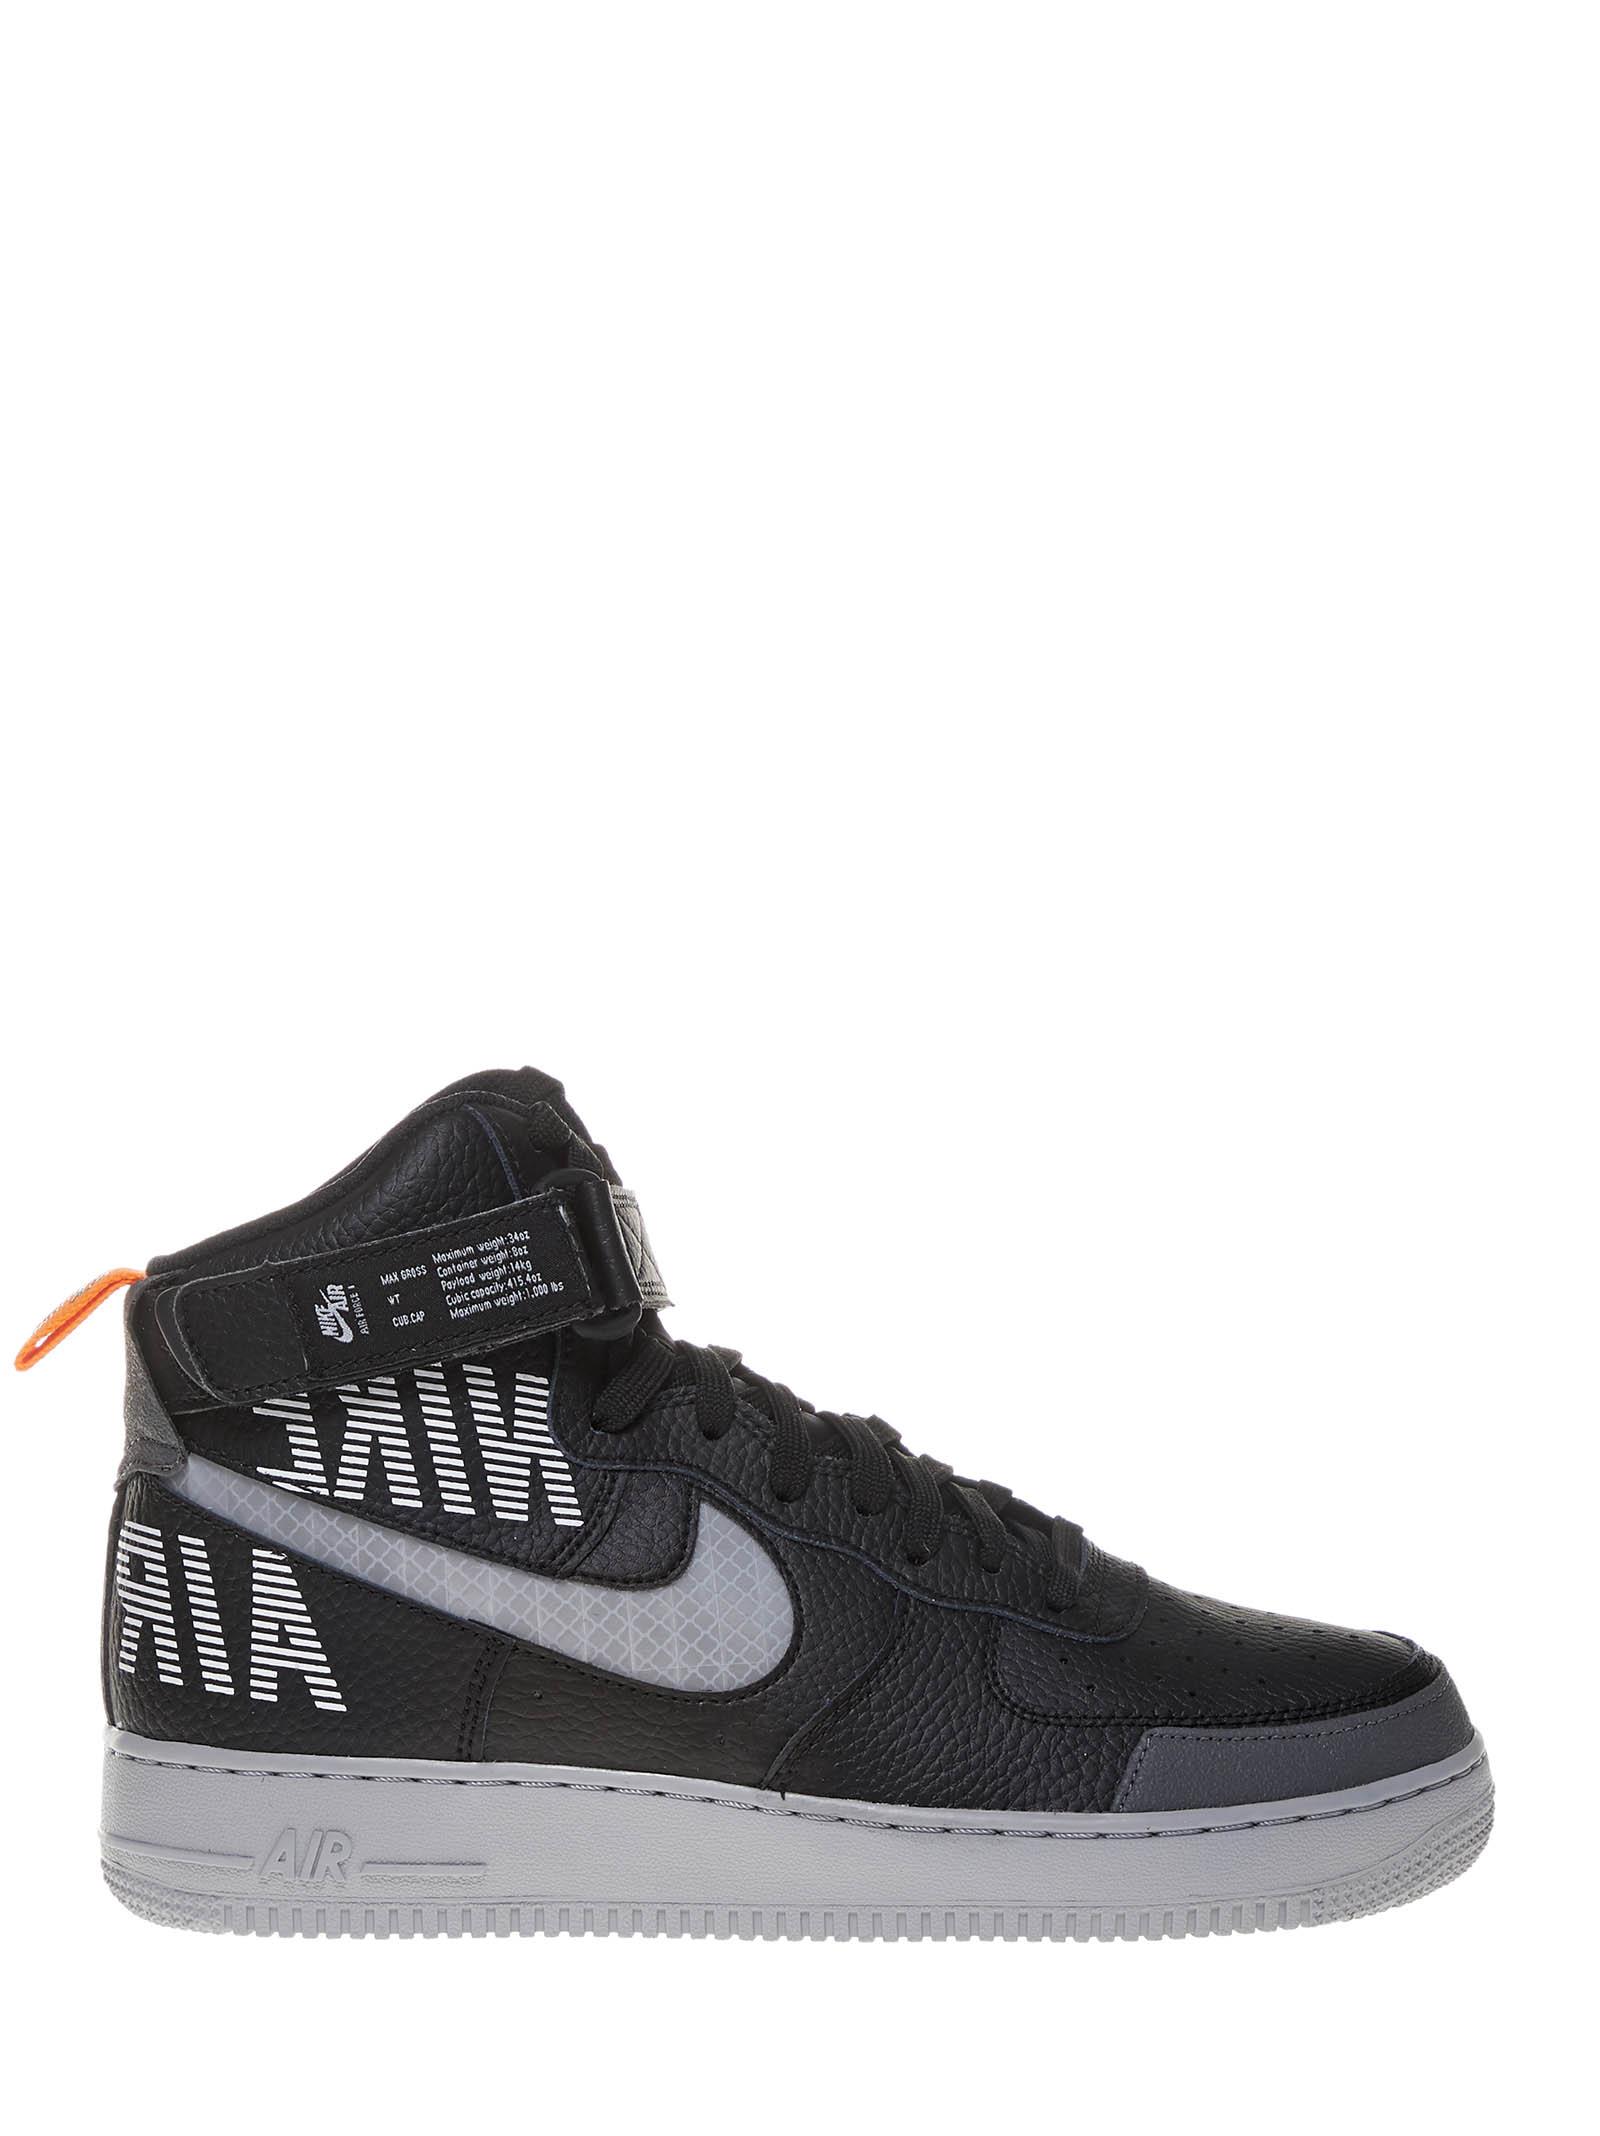 Nike Black Air Force 1 Hight '07 Lv8 Sneakers With Reflective Swoosh And  Grey Details. for Men | Lyst